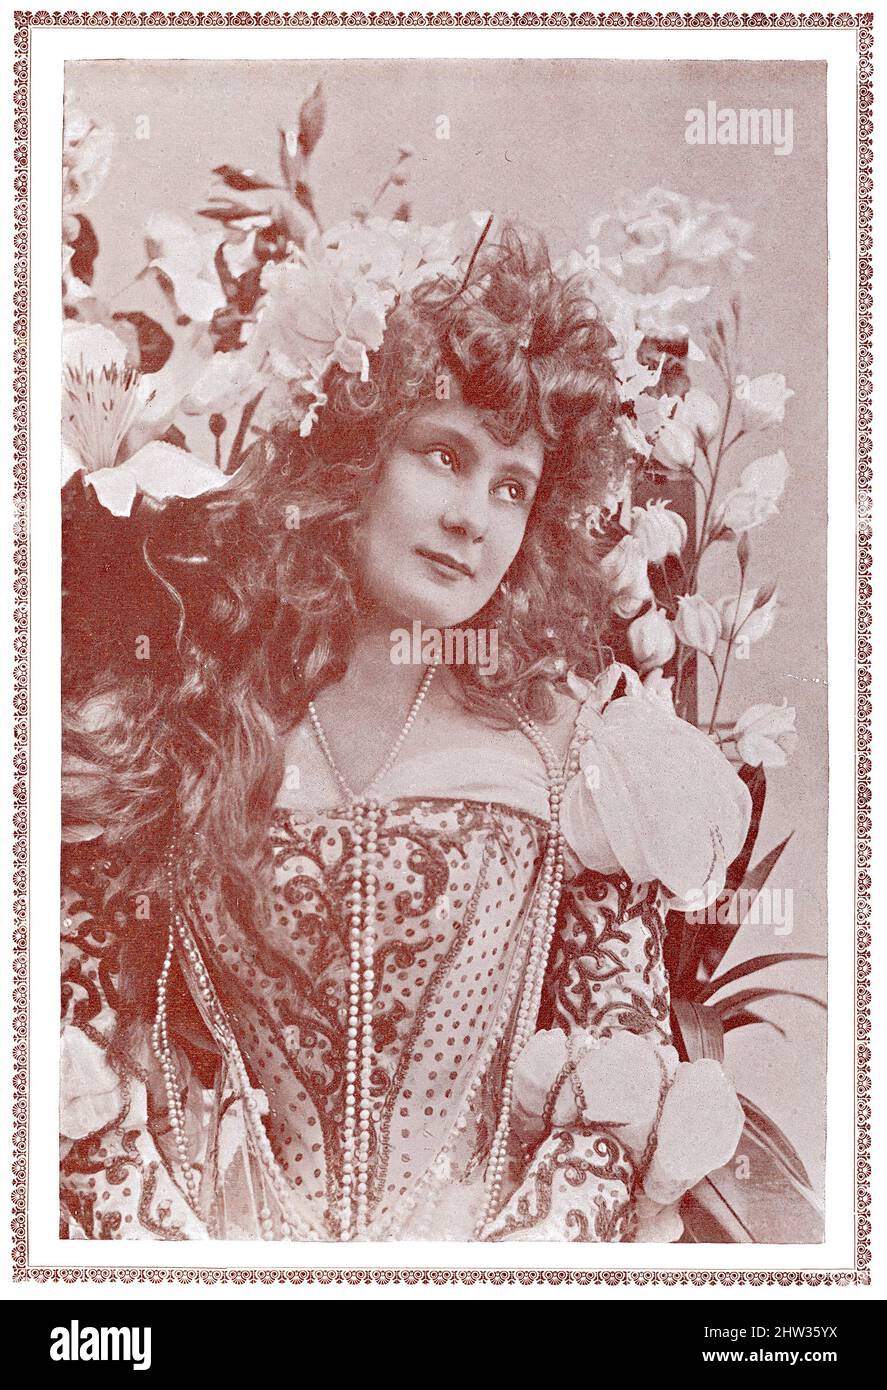 Portrait of French Actress, mime, music-hall artist and demi-mondaine - Jeanne Thylda (Jeanne Tricaud). Image from the illustrated Franco-German theater magazine 'Das Album', 1898. Stock Photo